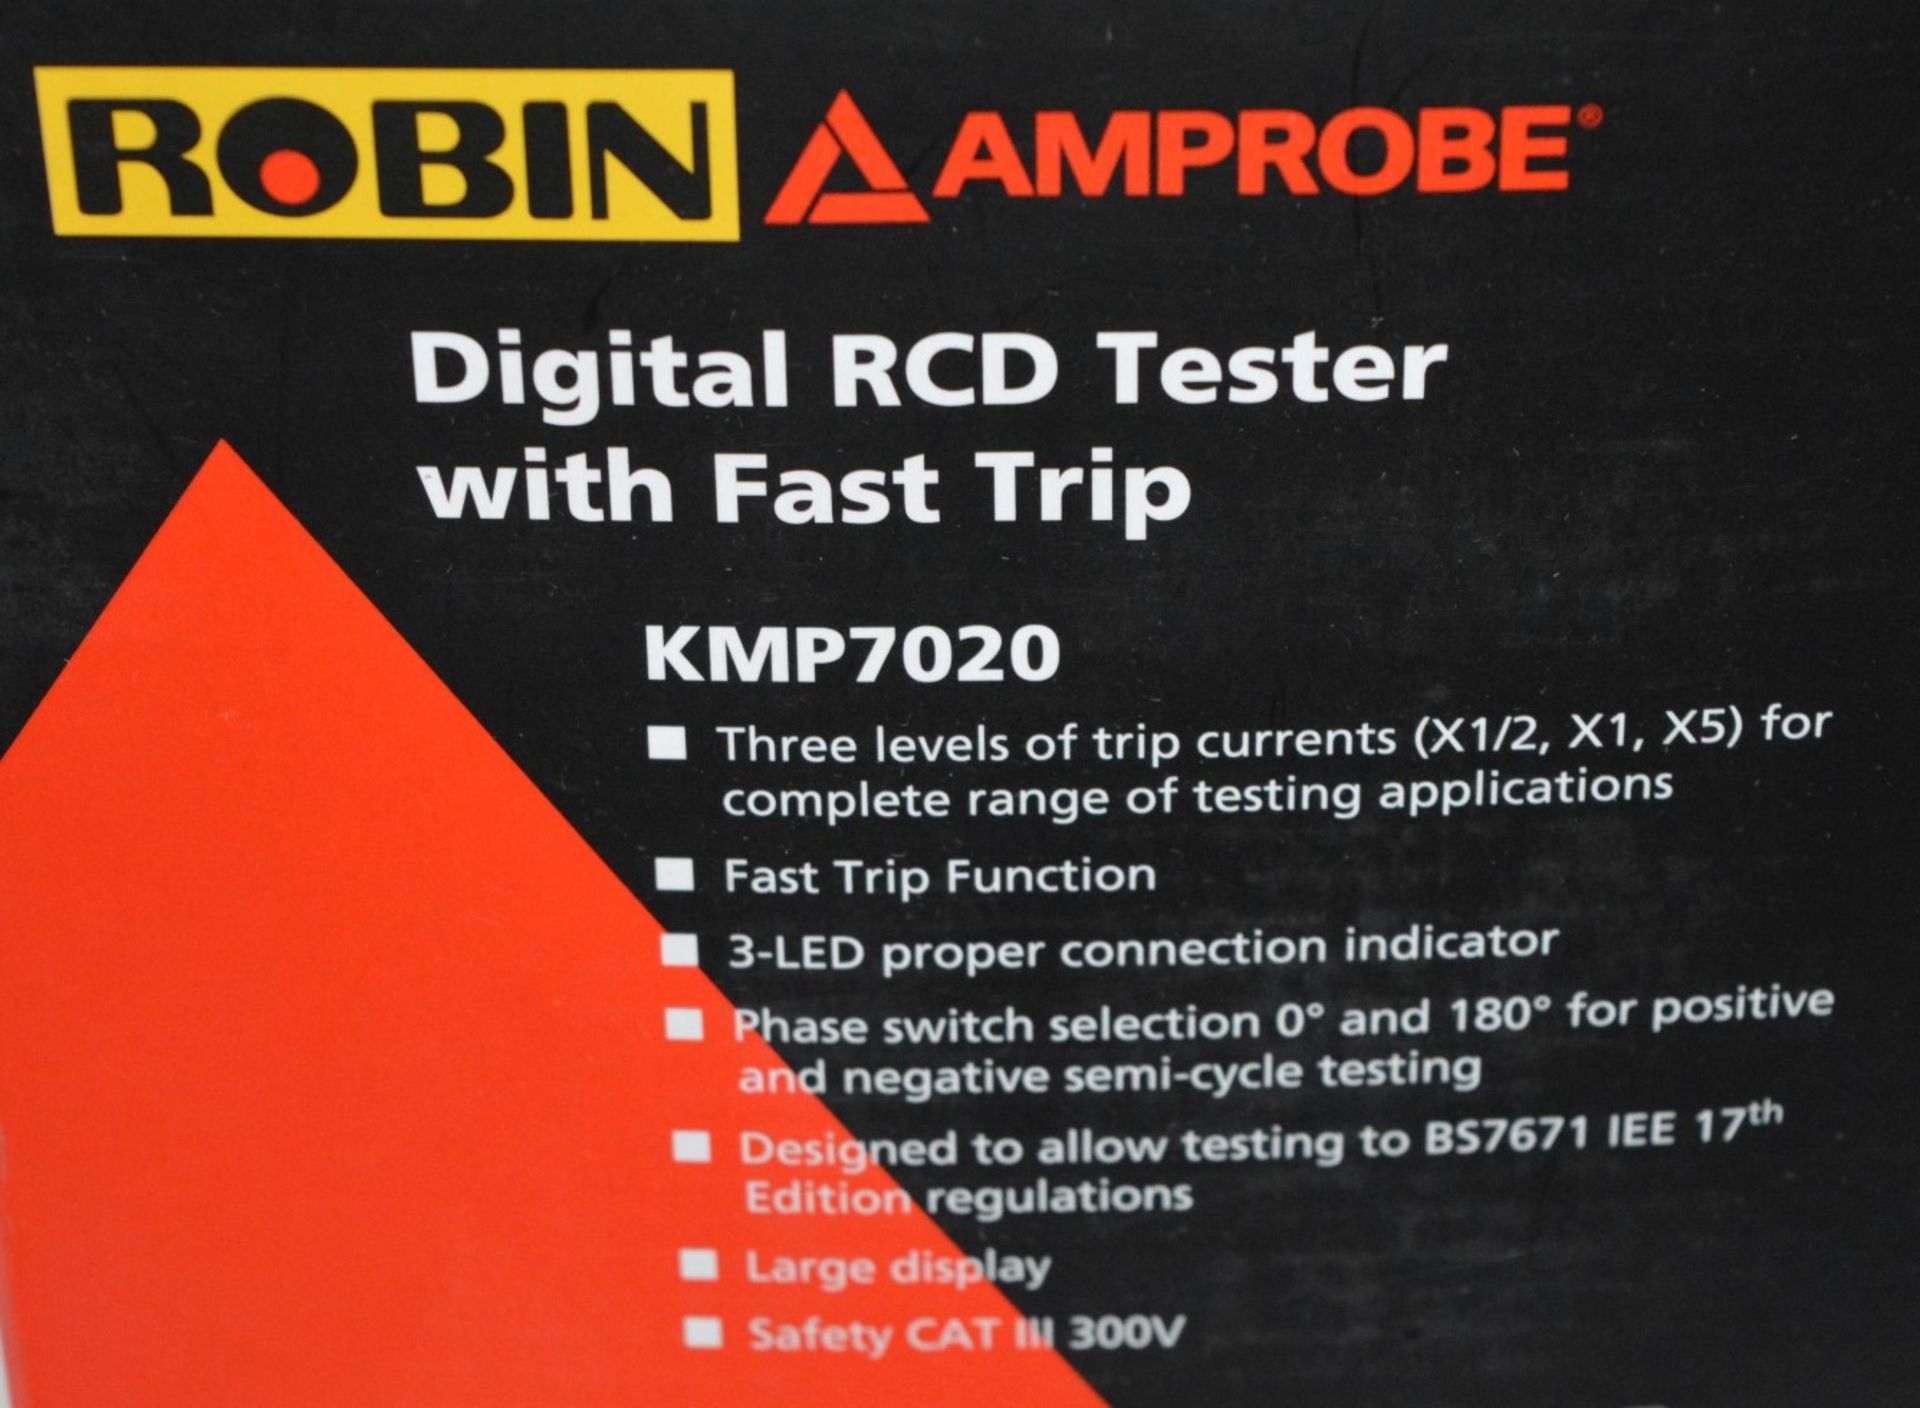 1 x Robin Amprobe Digital RCD Tester Wth Fast Trip - Model KMP7020 - Boxed With All Accessories - - Image 7 of 12